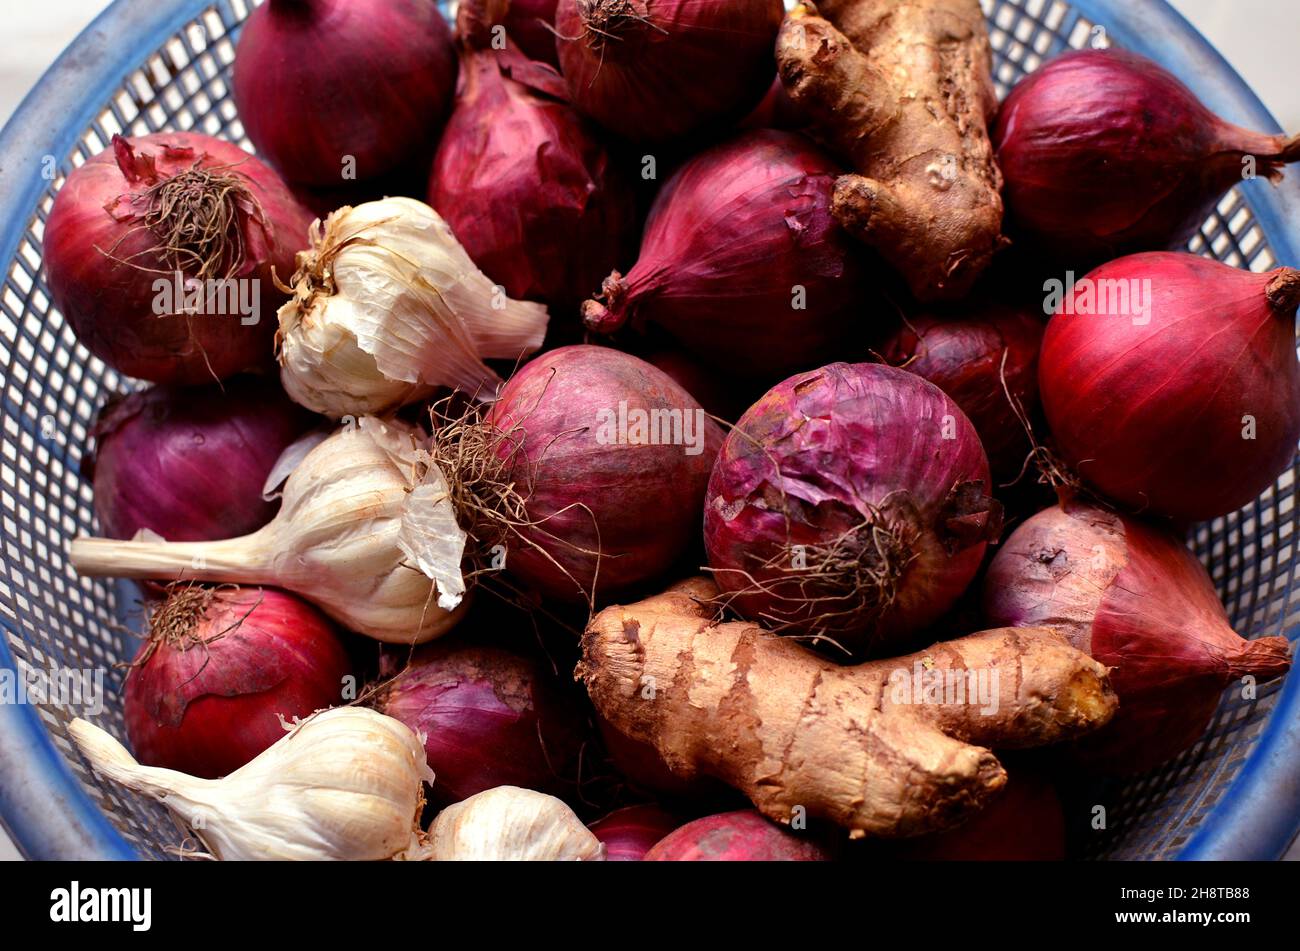 There is a variety of vegetables, potato, Pointed gourd, karela, onion, garlic, ginger, cauliflower, Cabbage Stock Photo